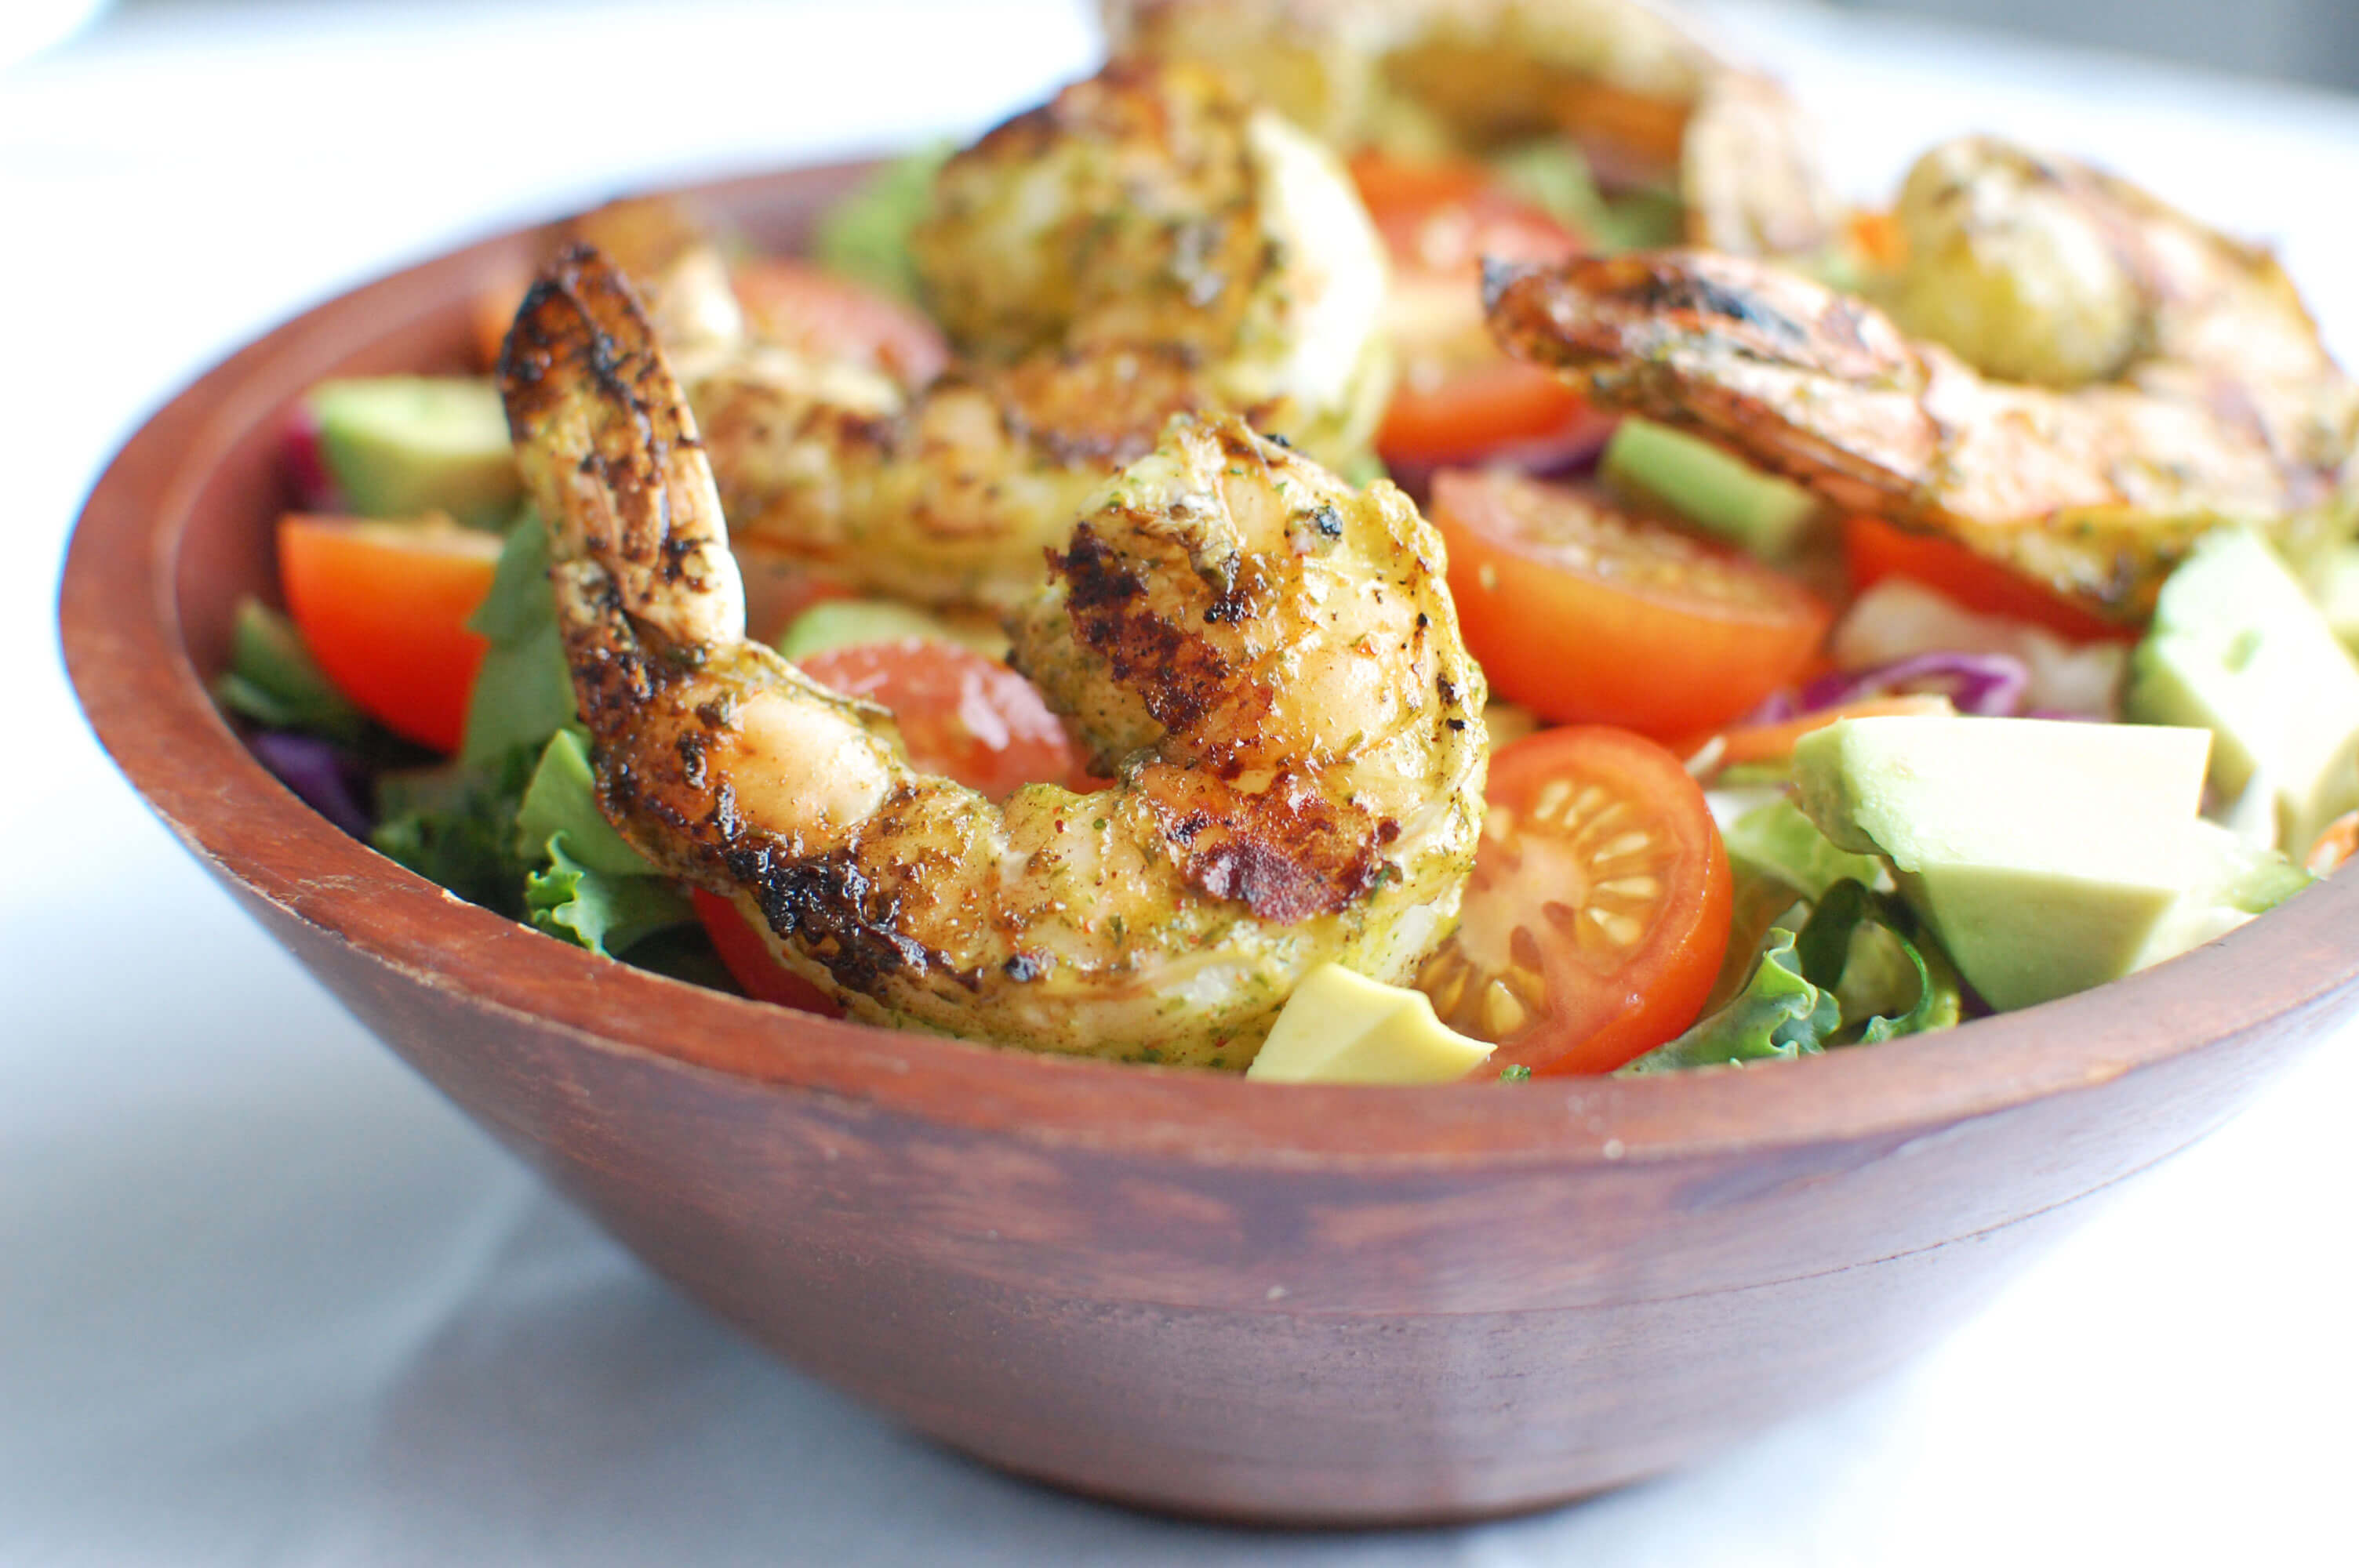 20 Meal Ideas to Help Clients with Eczema: Grilled Shrimp Salad